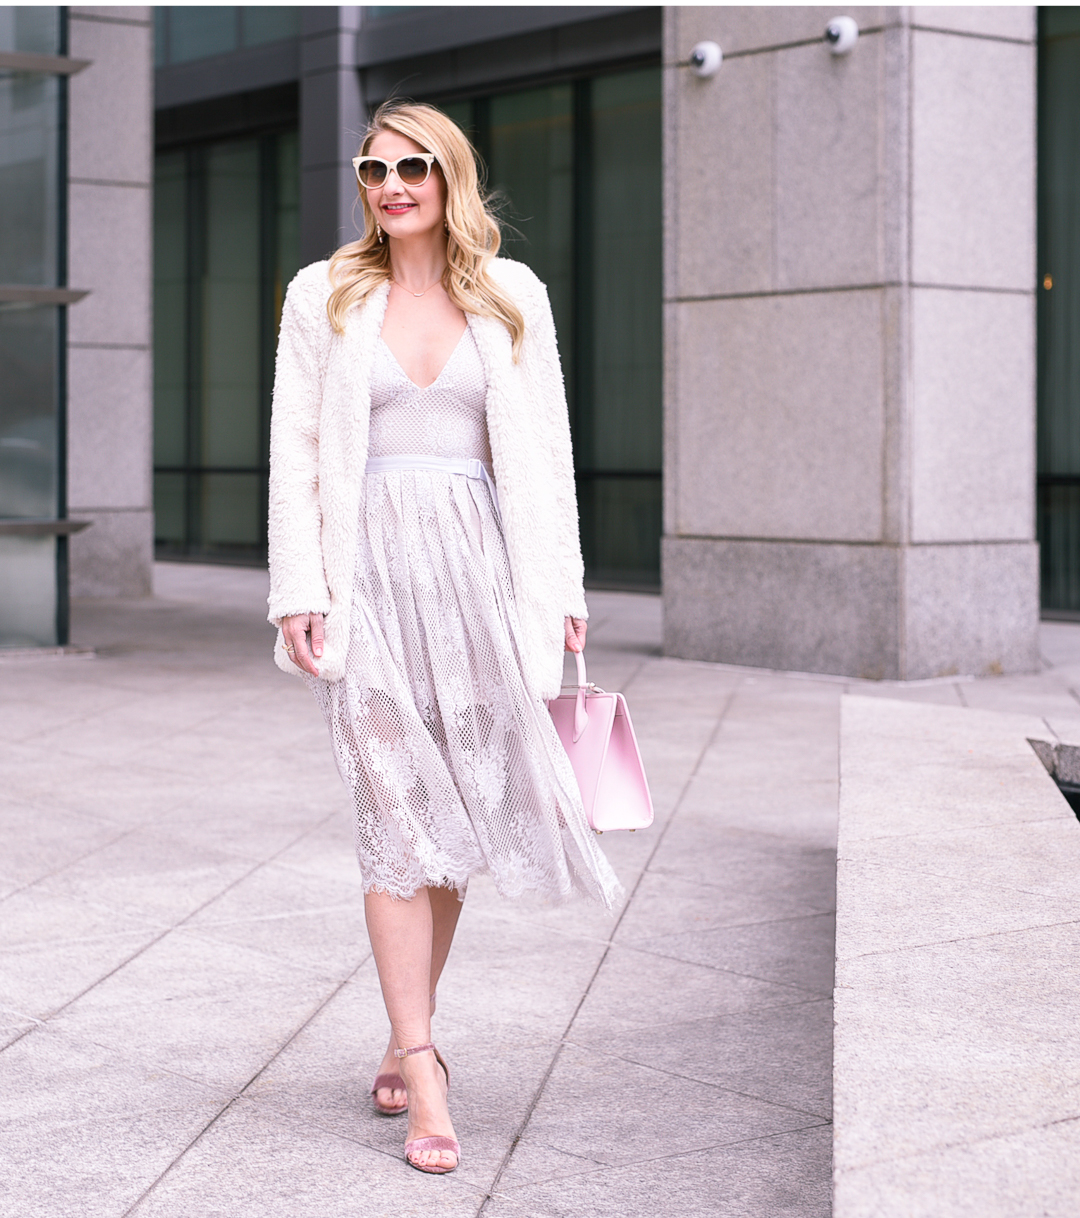 Jenna Colgrove wearing a lace Free People dress with a pink tote bag.